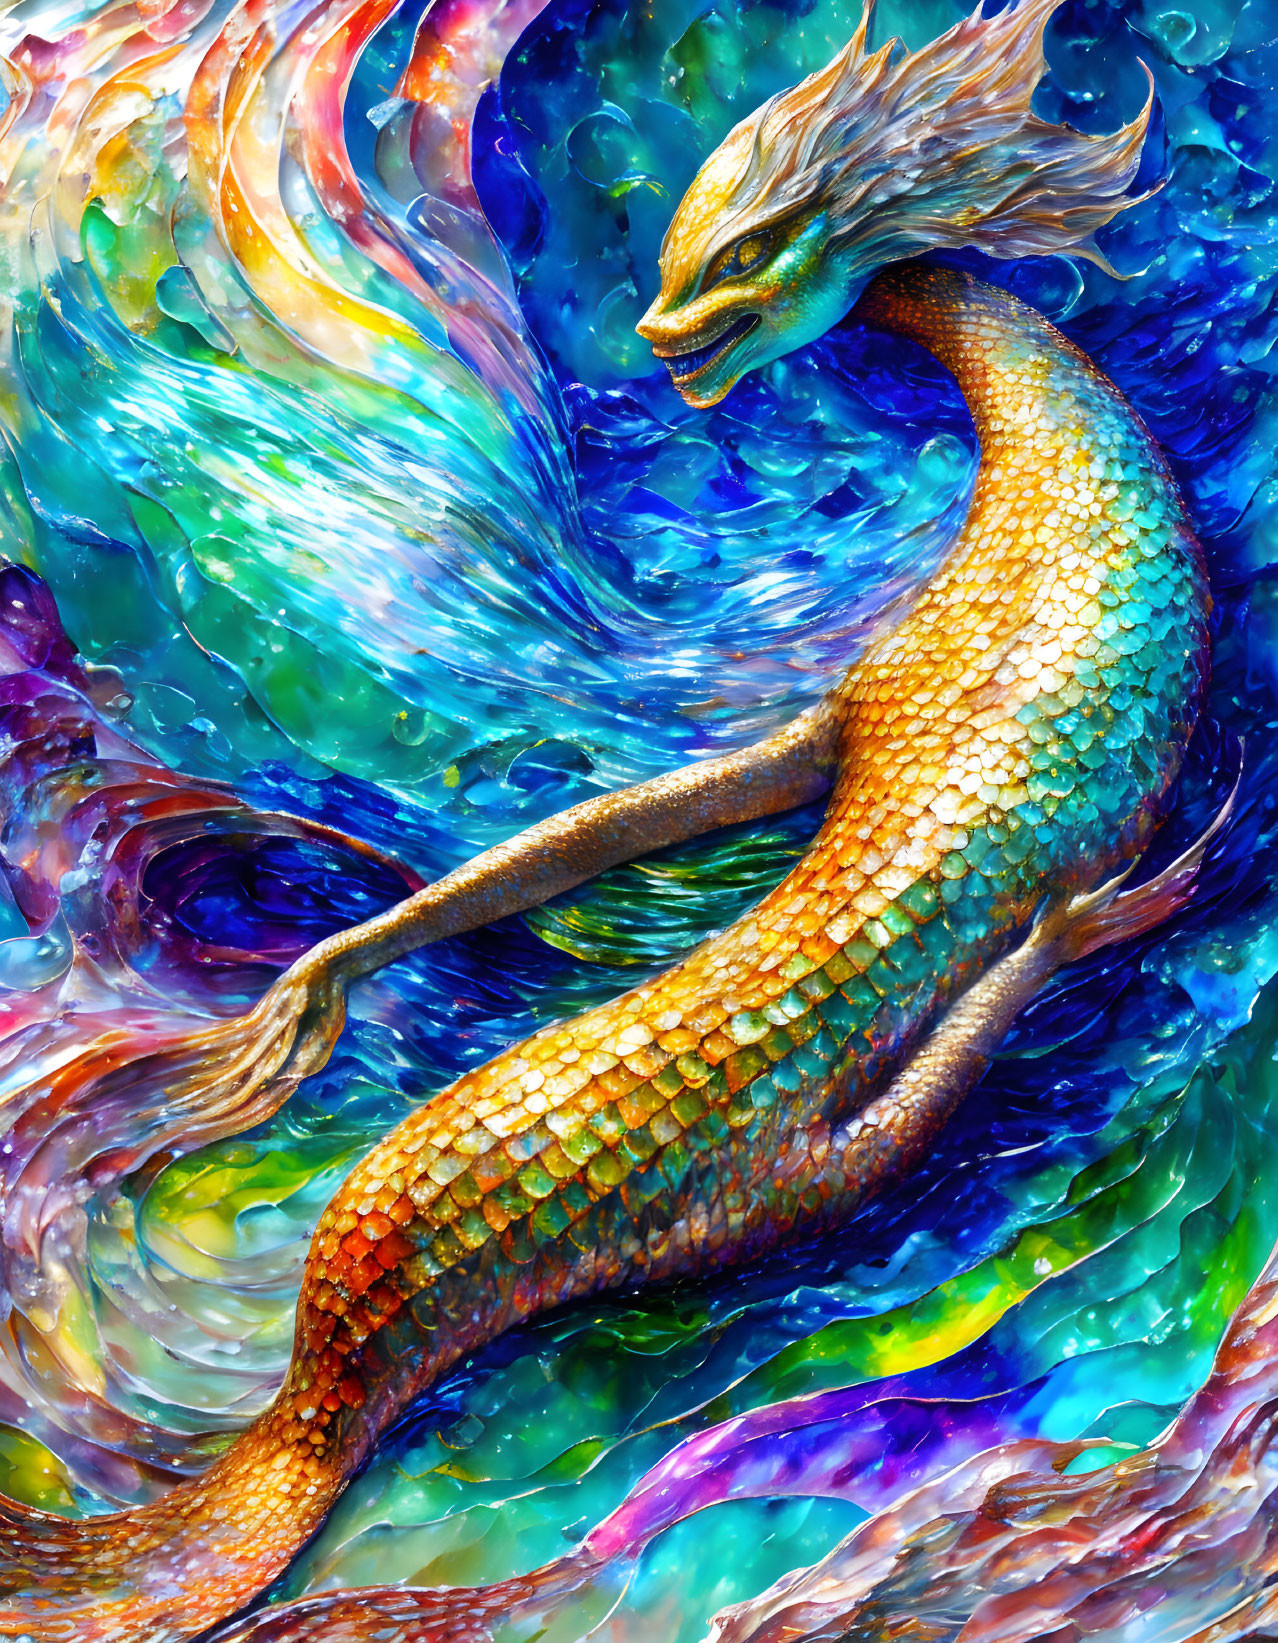 Colorful Mythical Sea Serpent Illustration on Abstract Background